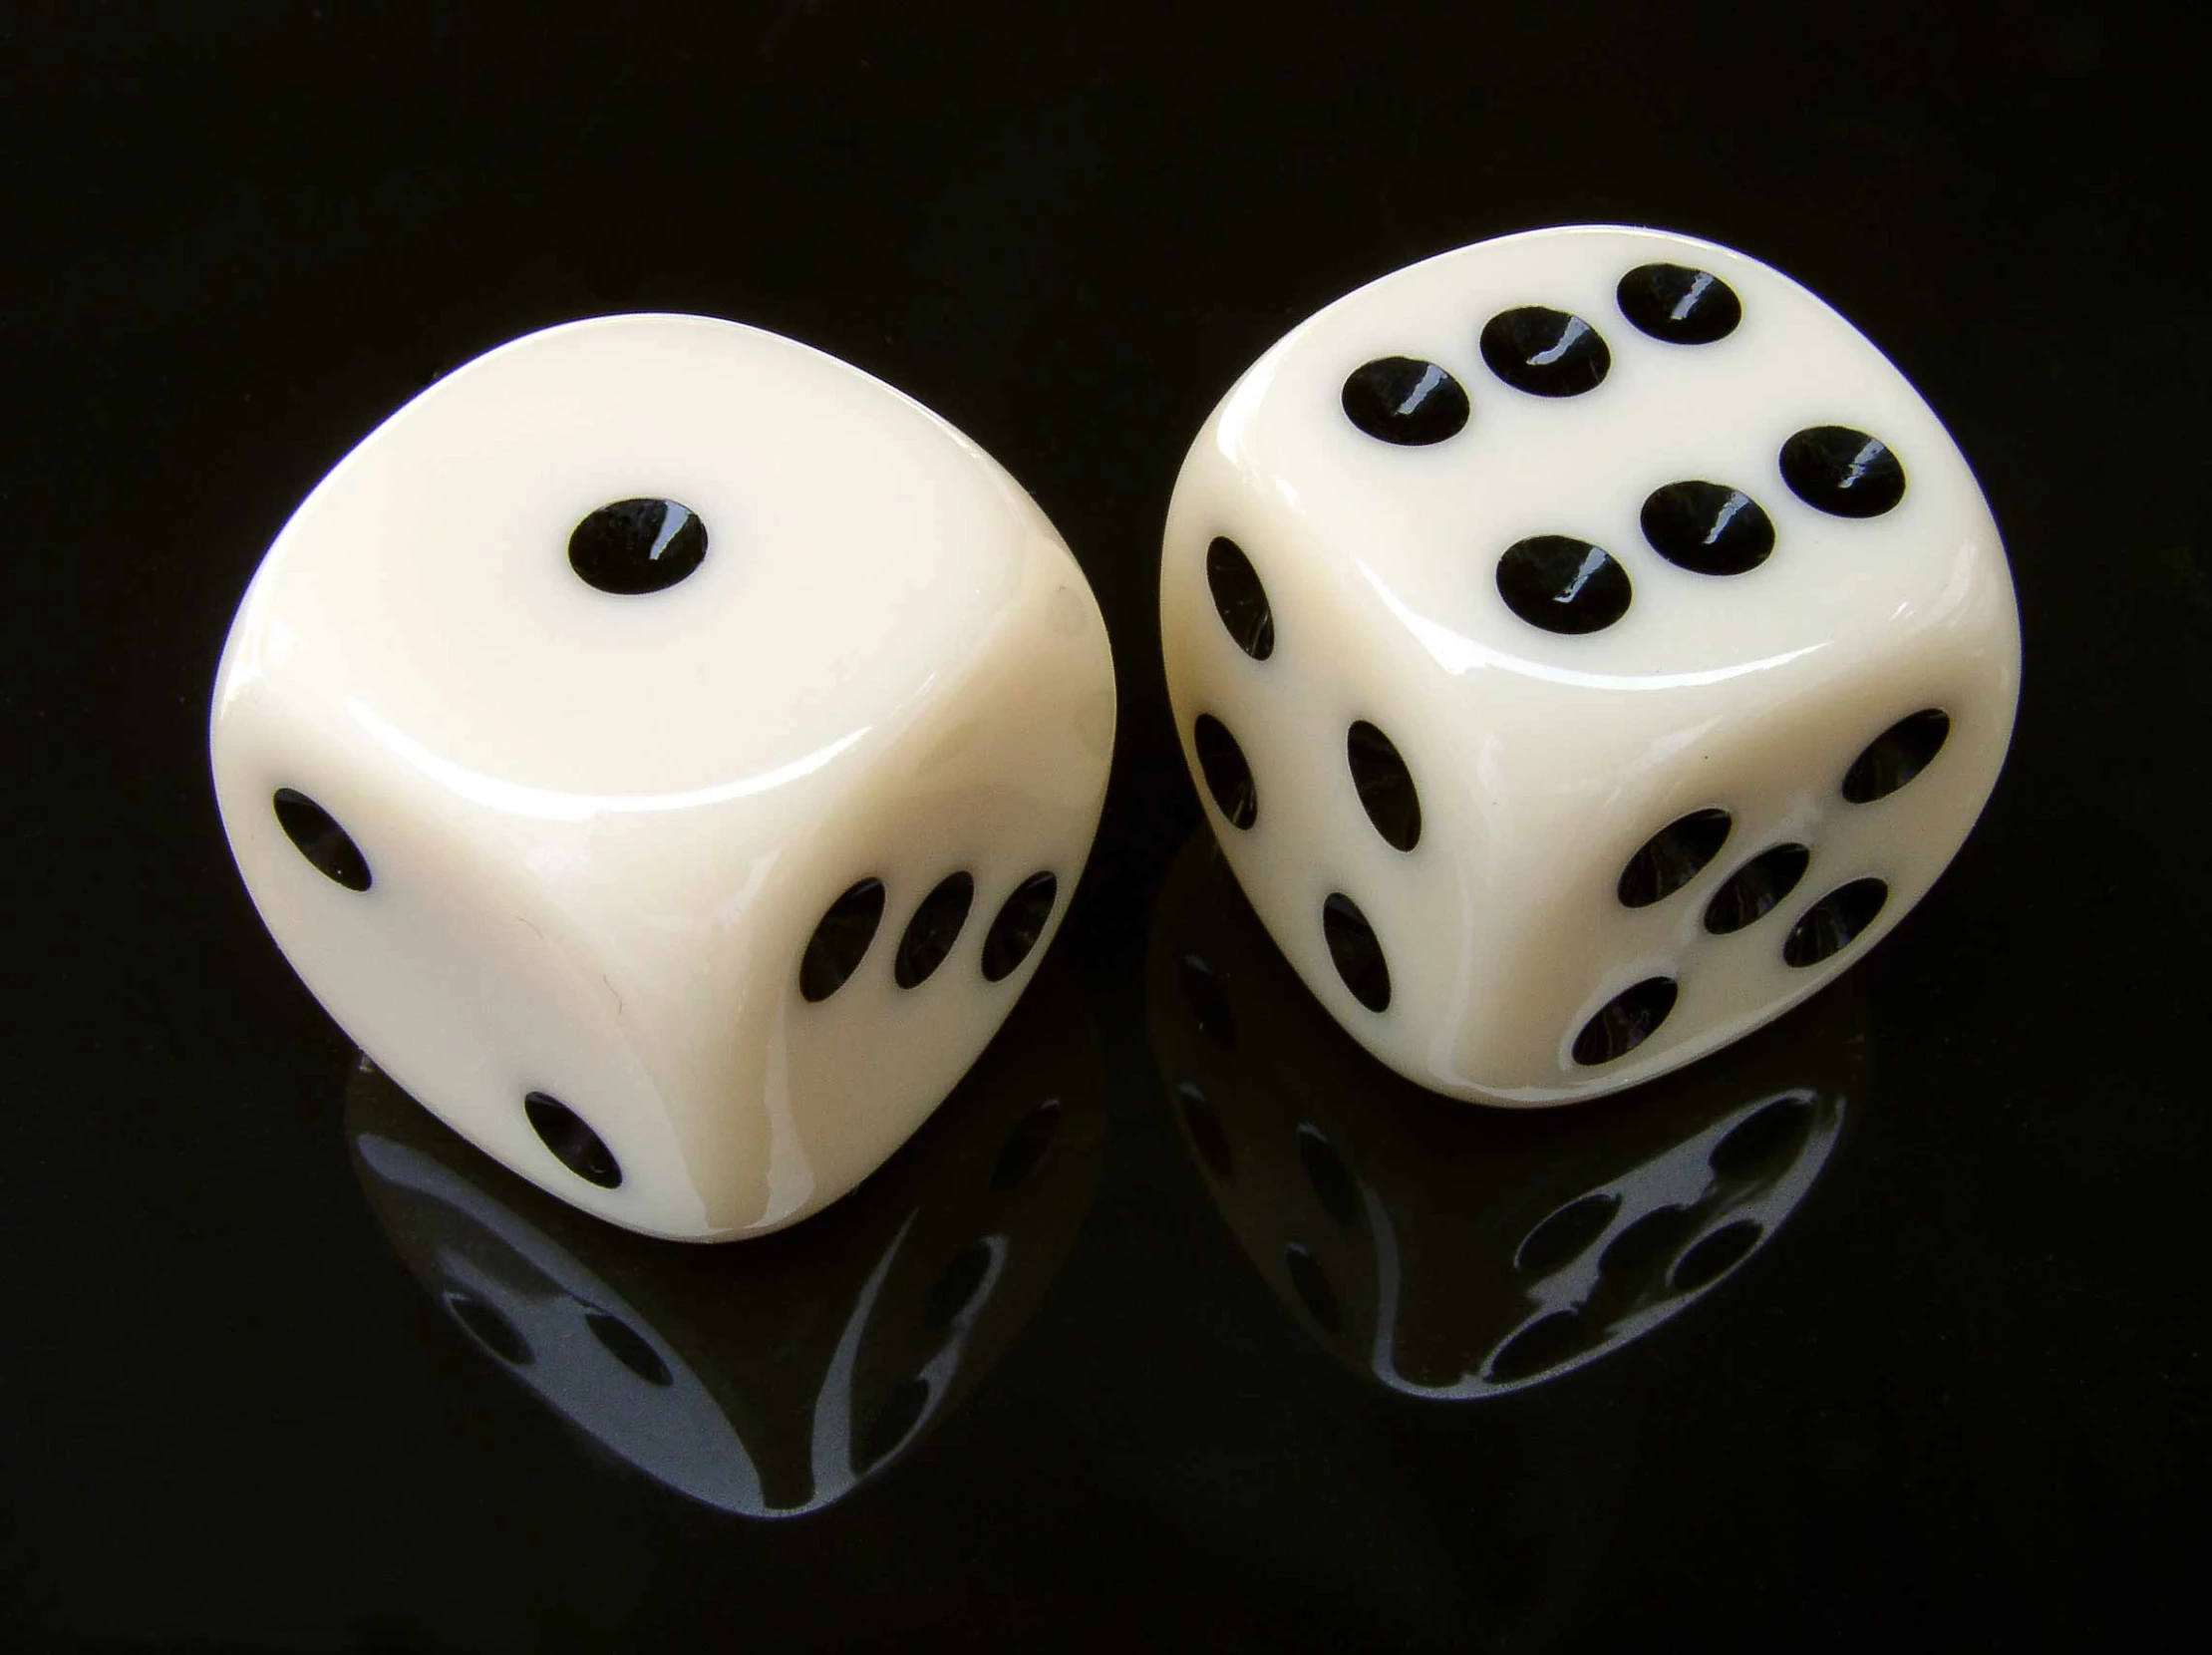 two white dices sitting side by side on a black surface